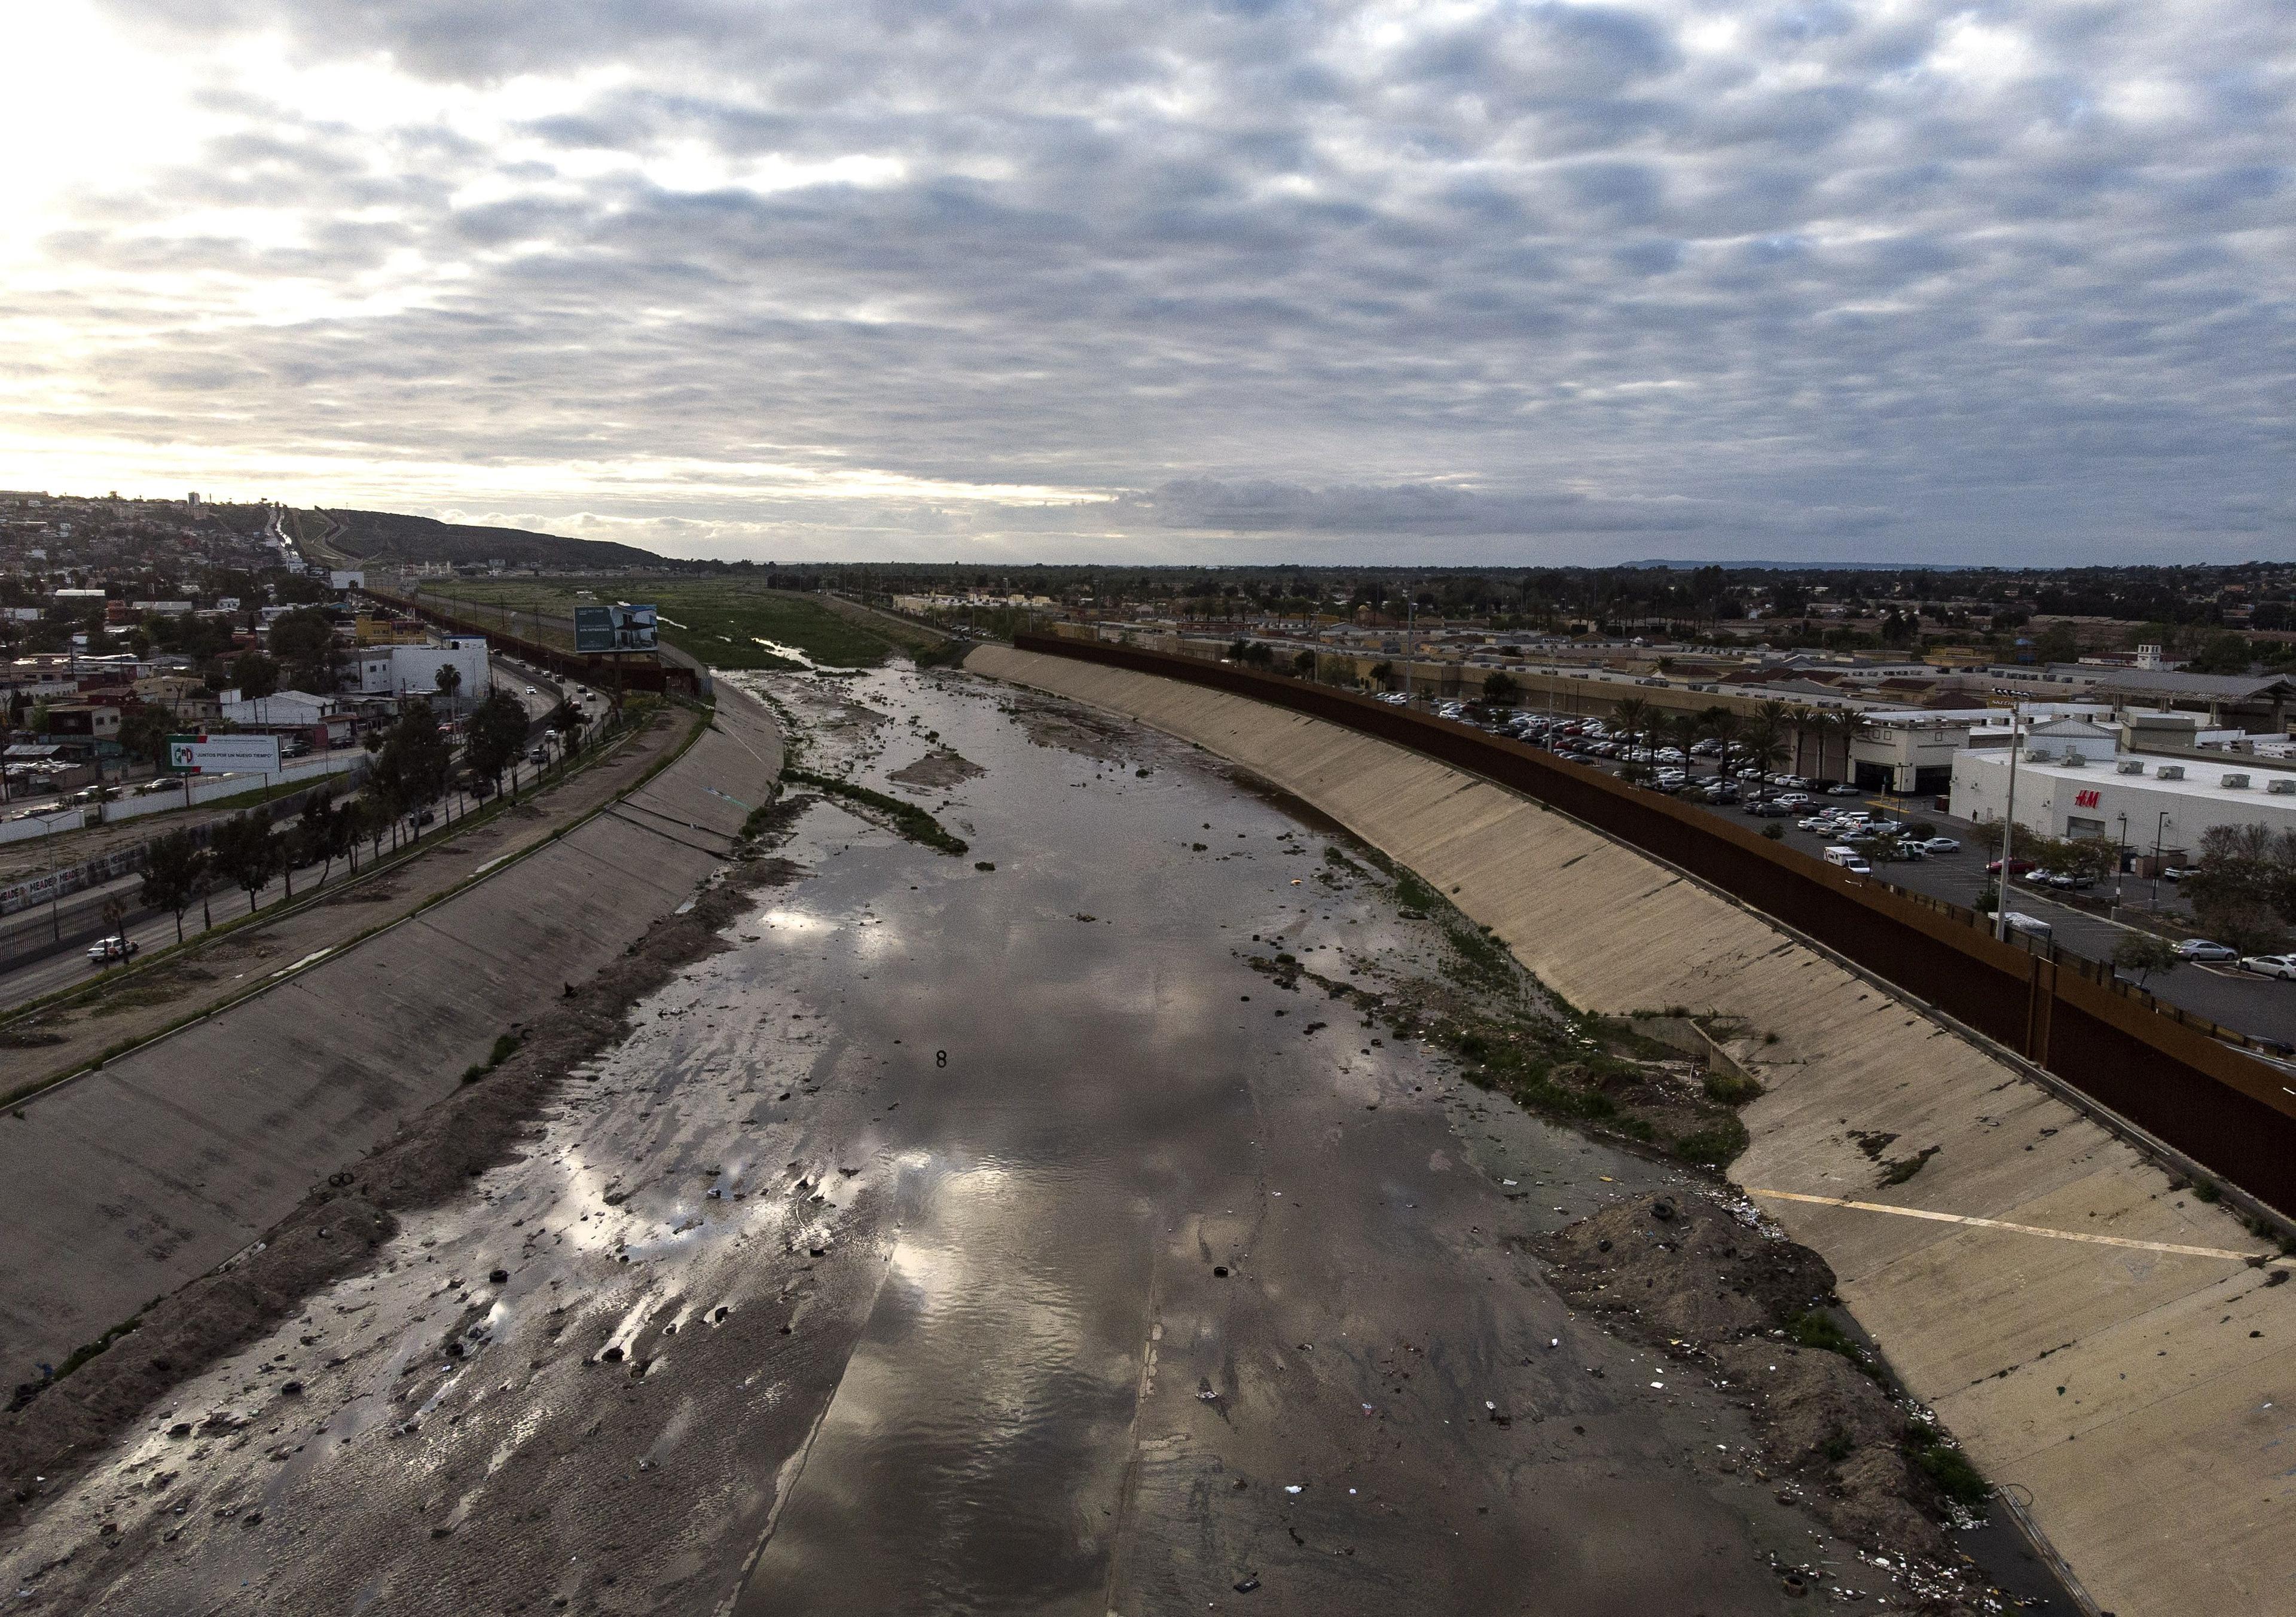 California to Receive $100 Million in Federal Funding for Tijuana Sewage Crisis in San Diego